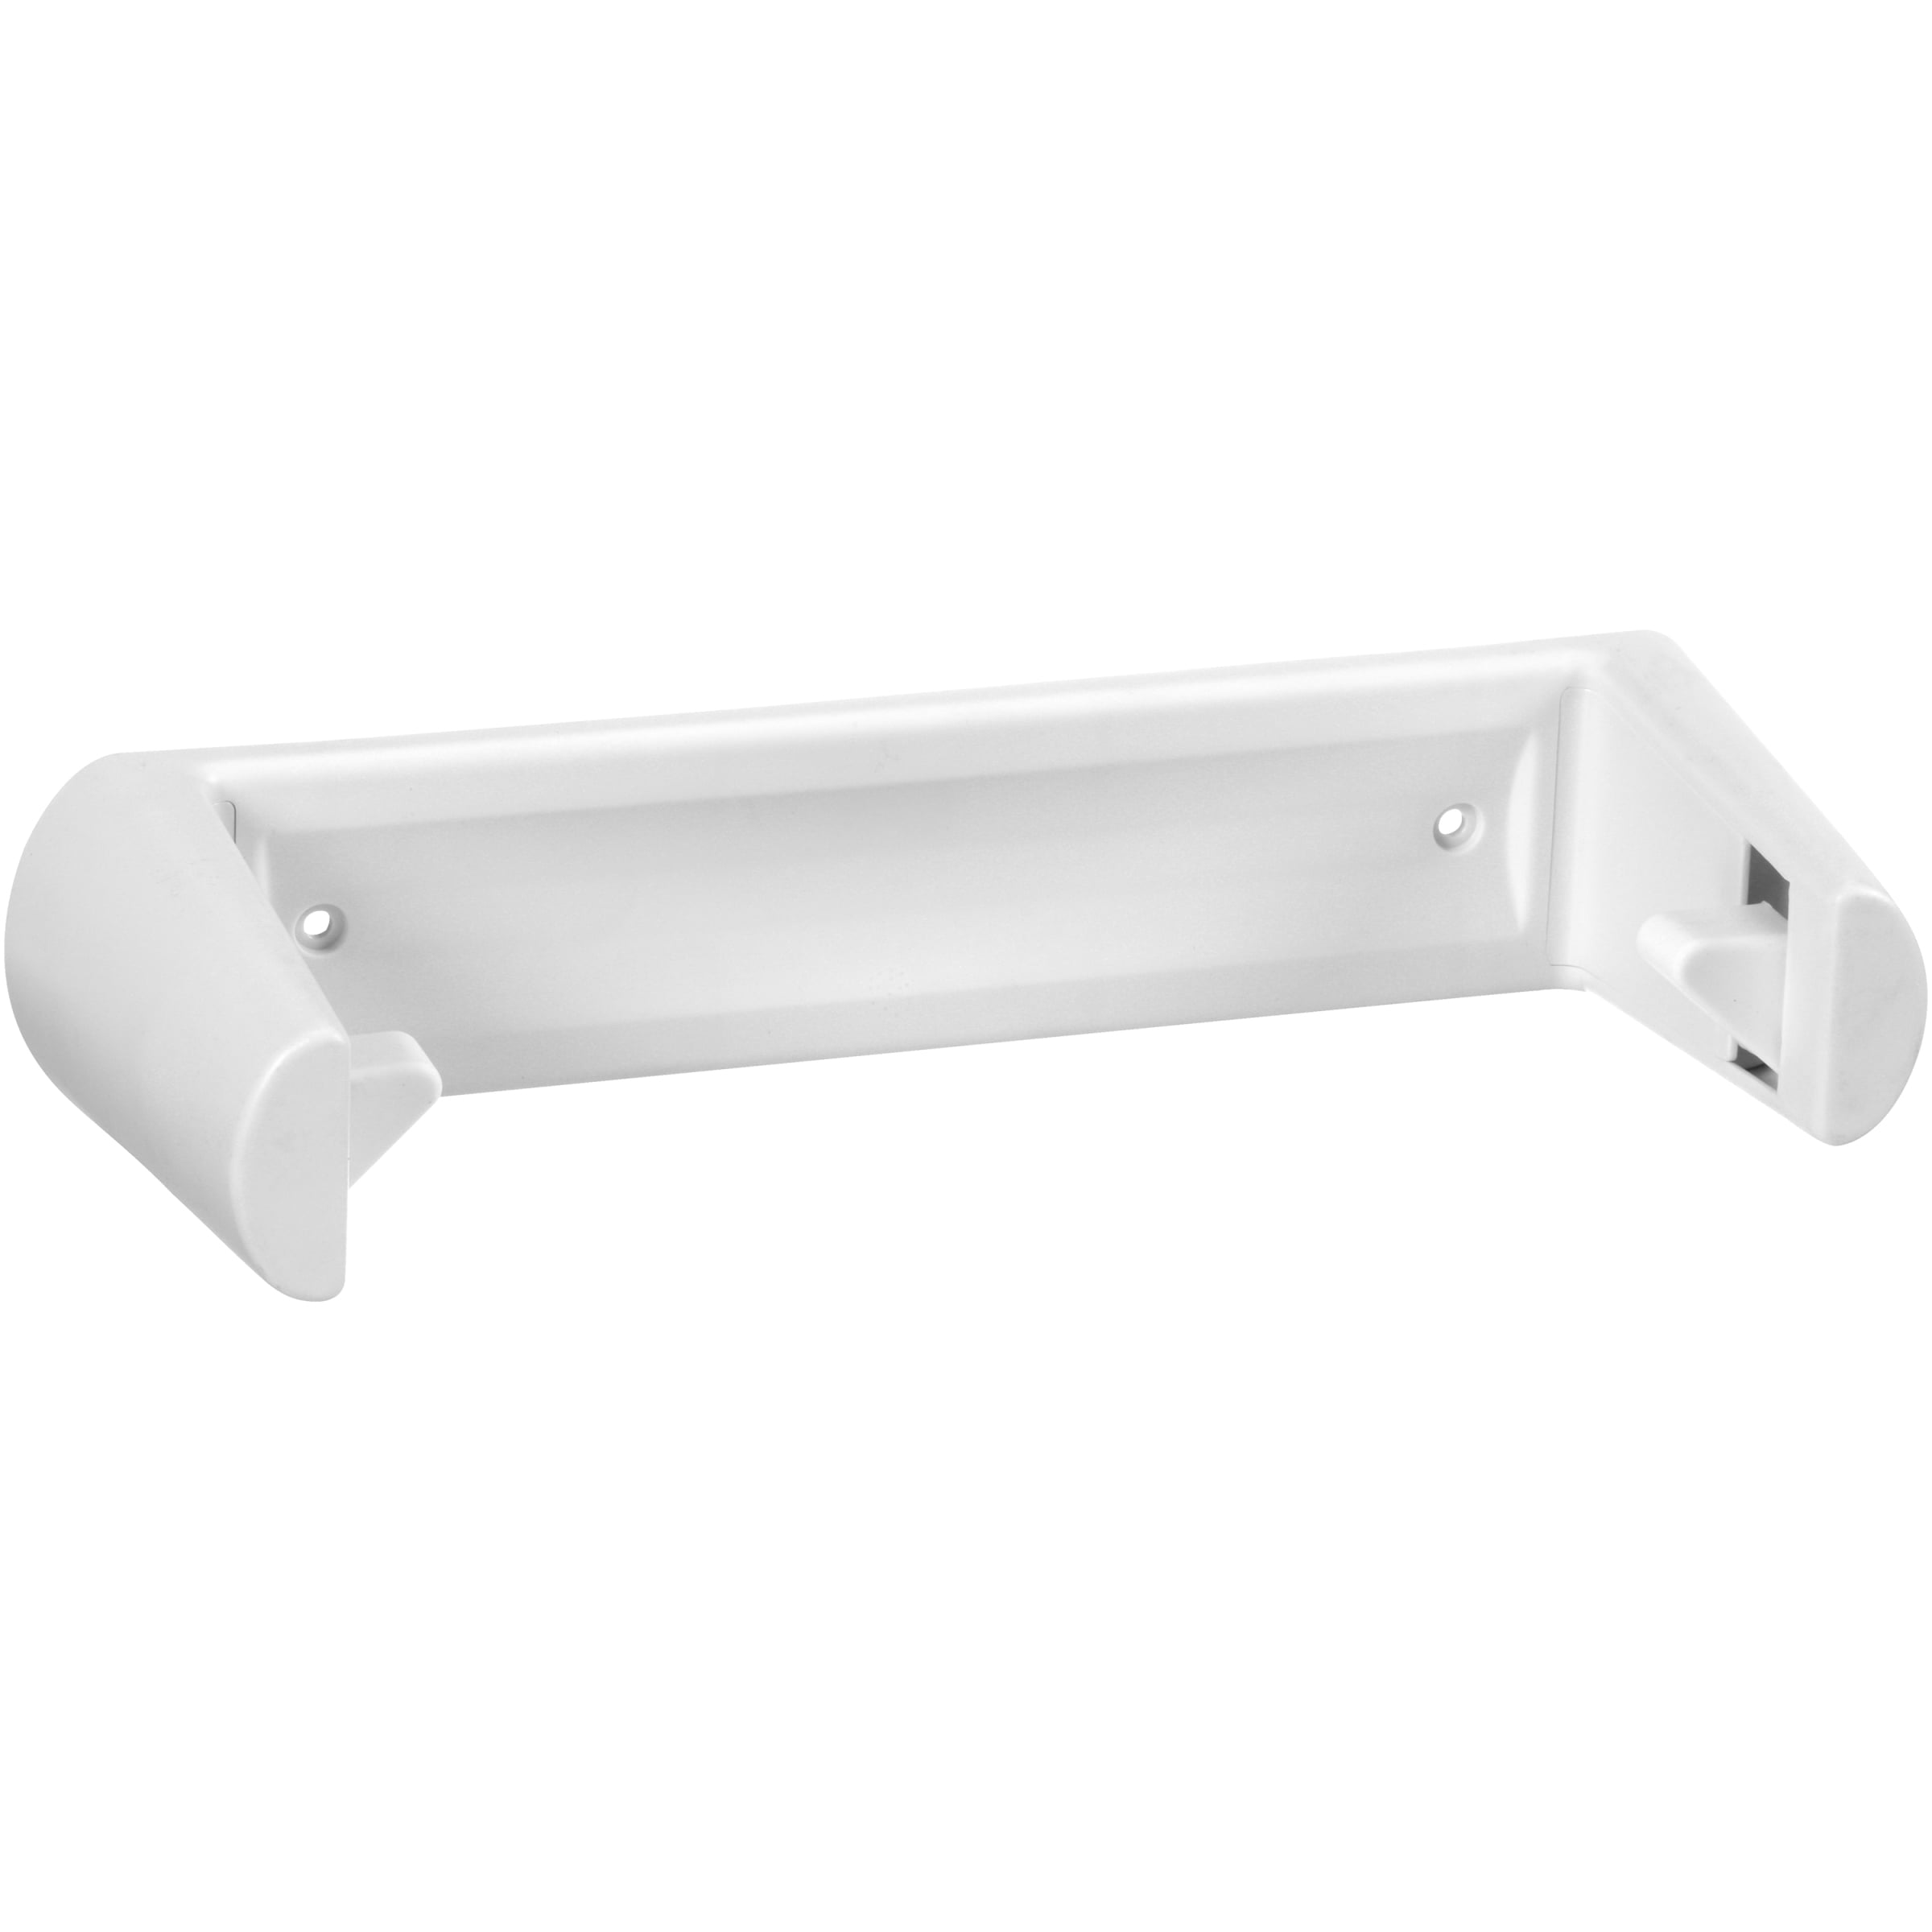 Mainstays Plastic Wall-Mounted Paper Towel Holder, White 